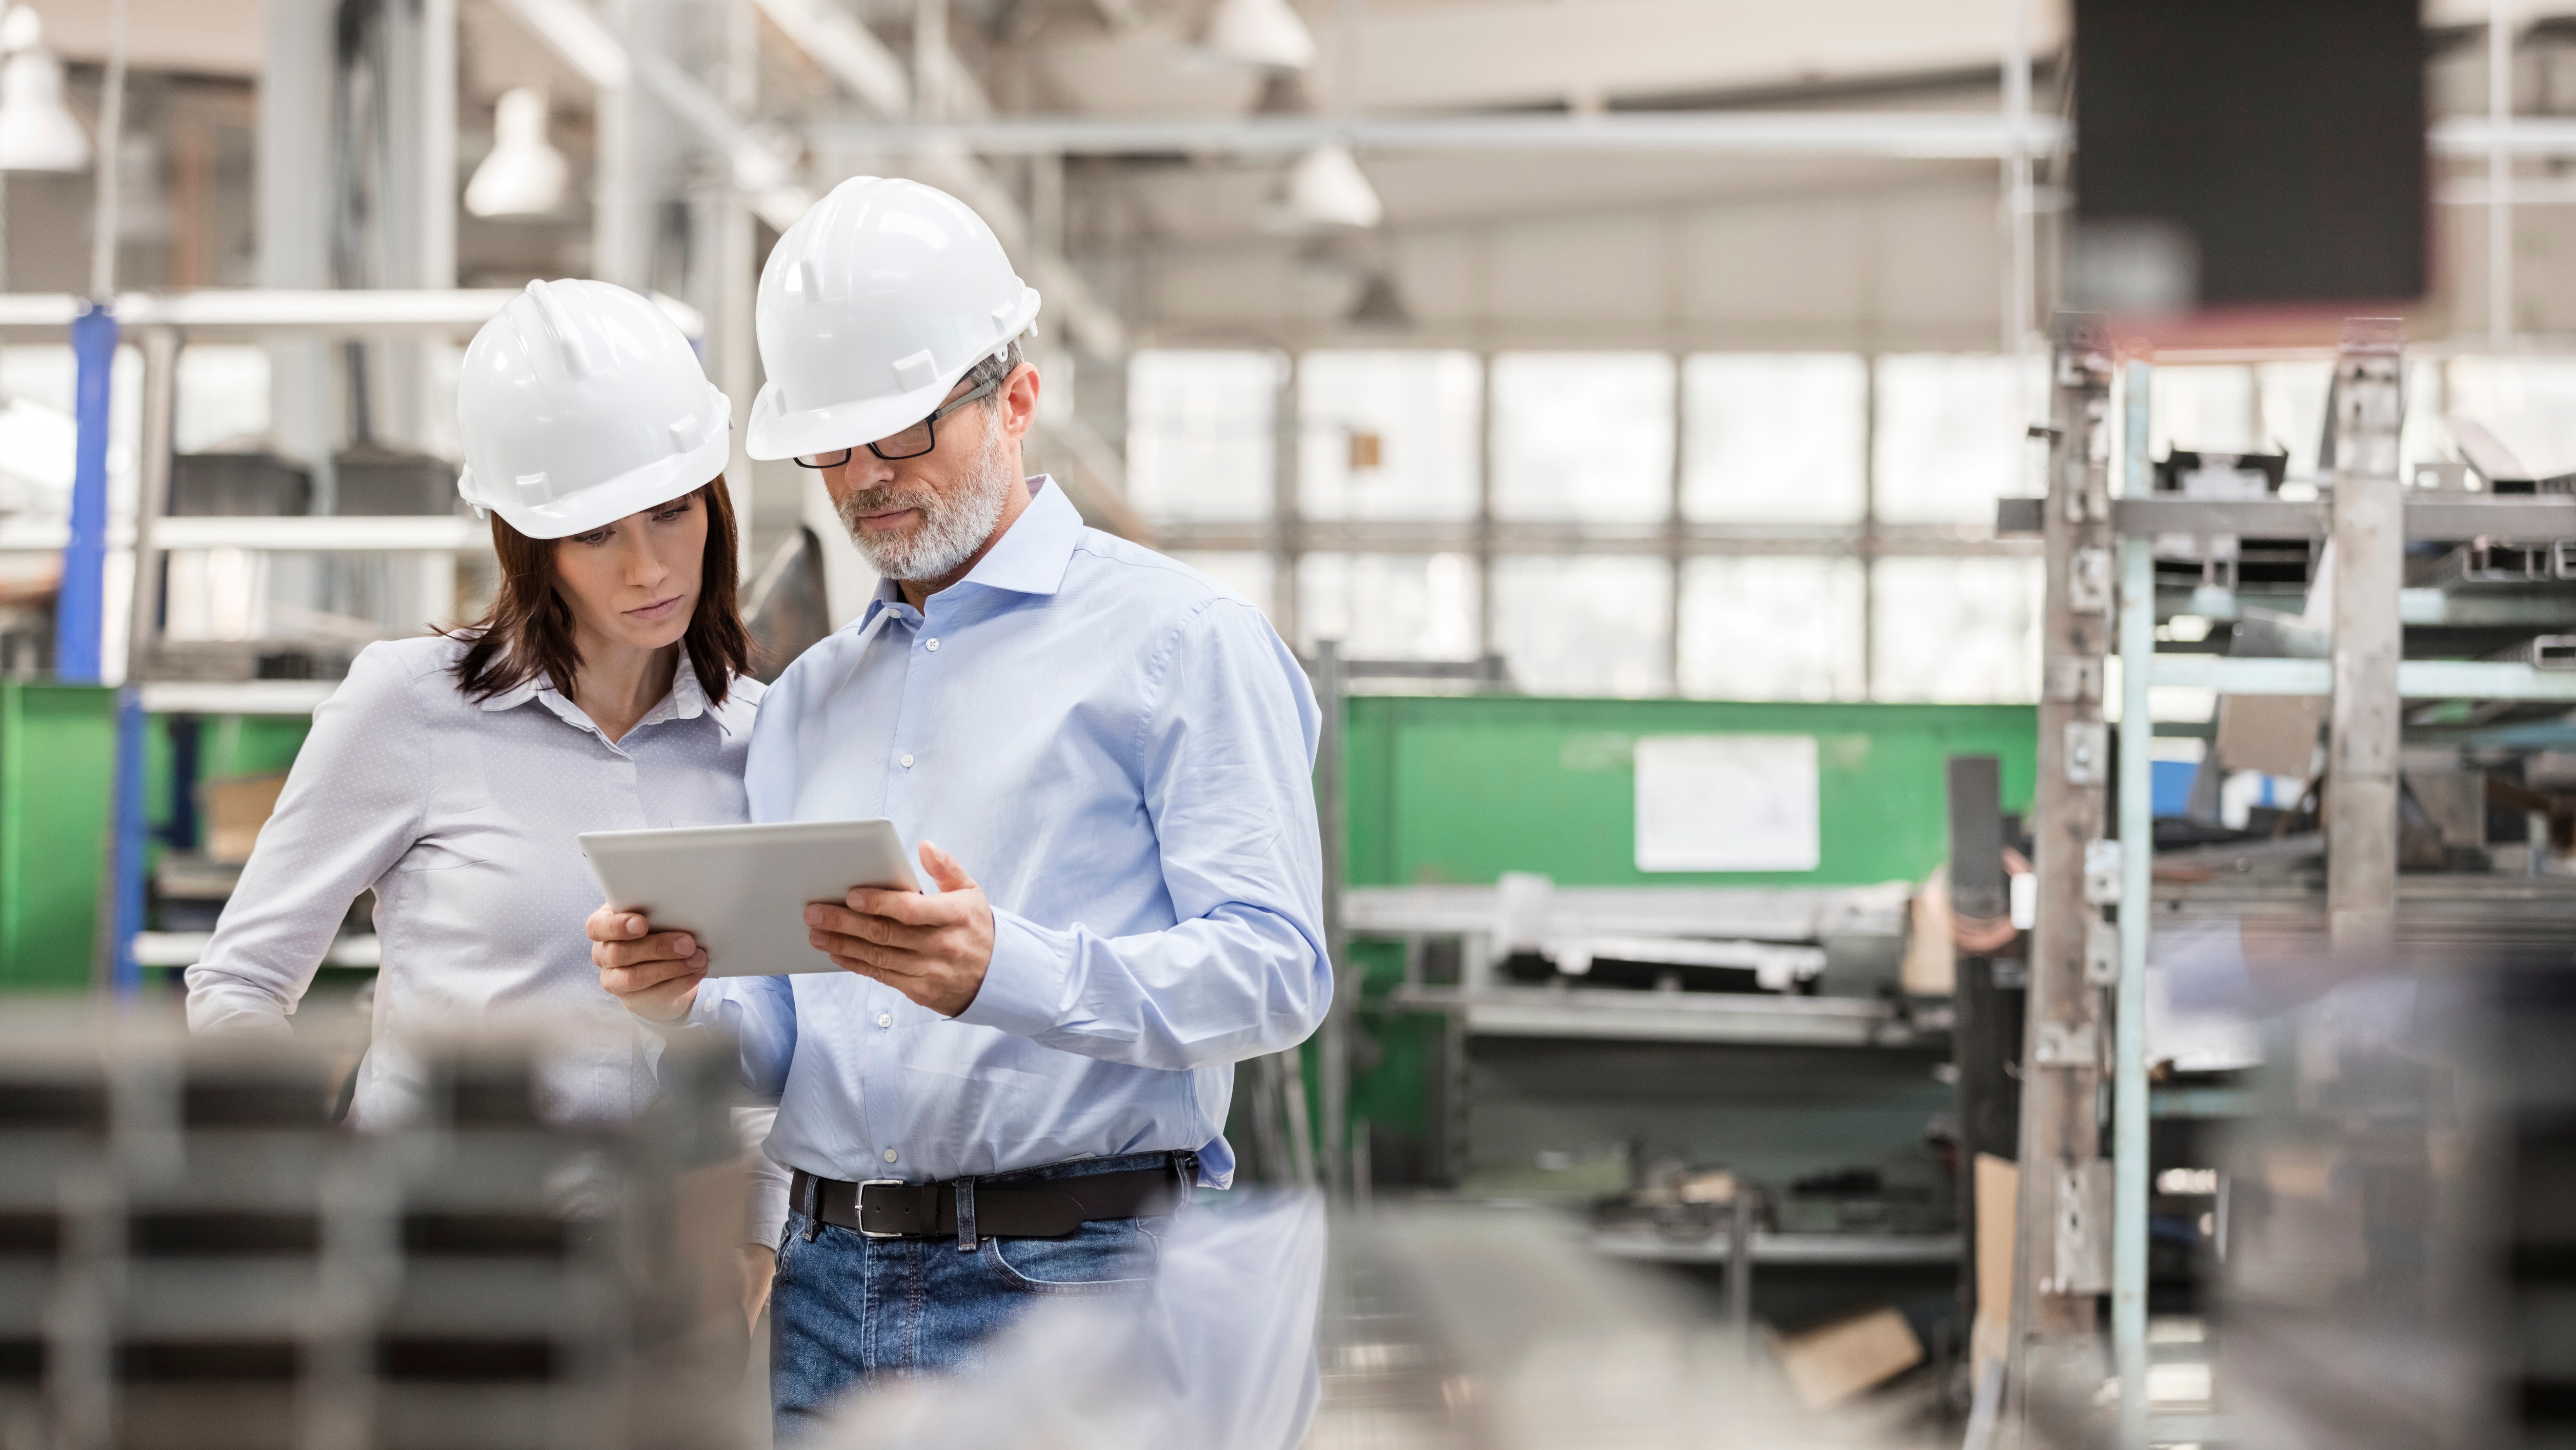 2 professionals wearing hard hats looking at tablet in industrial setting